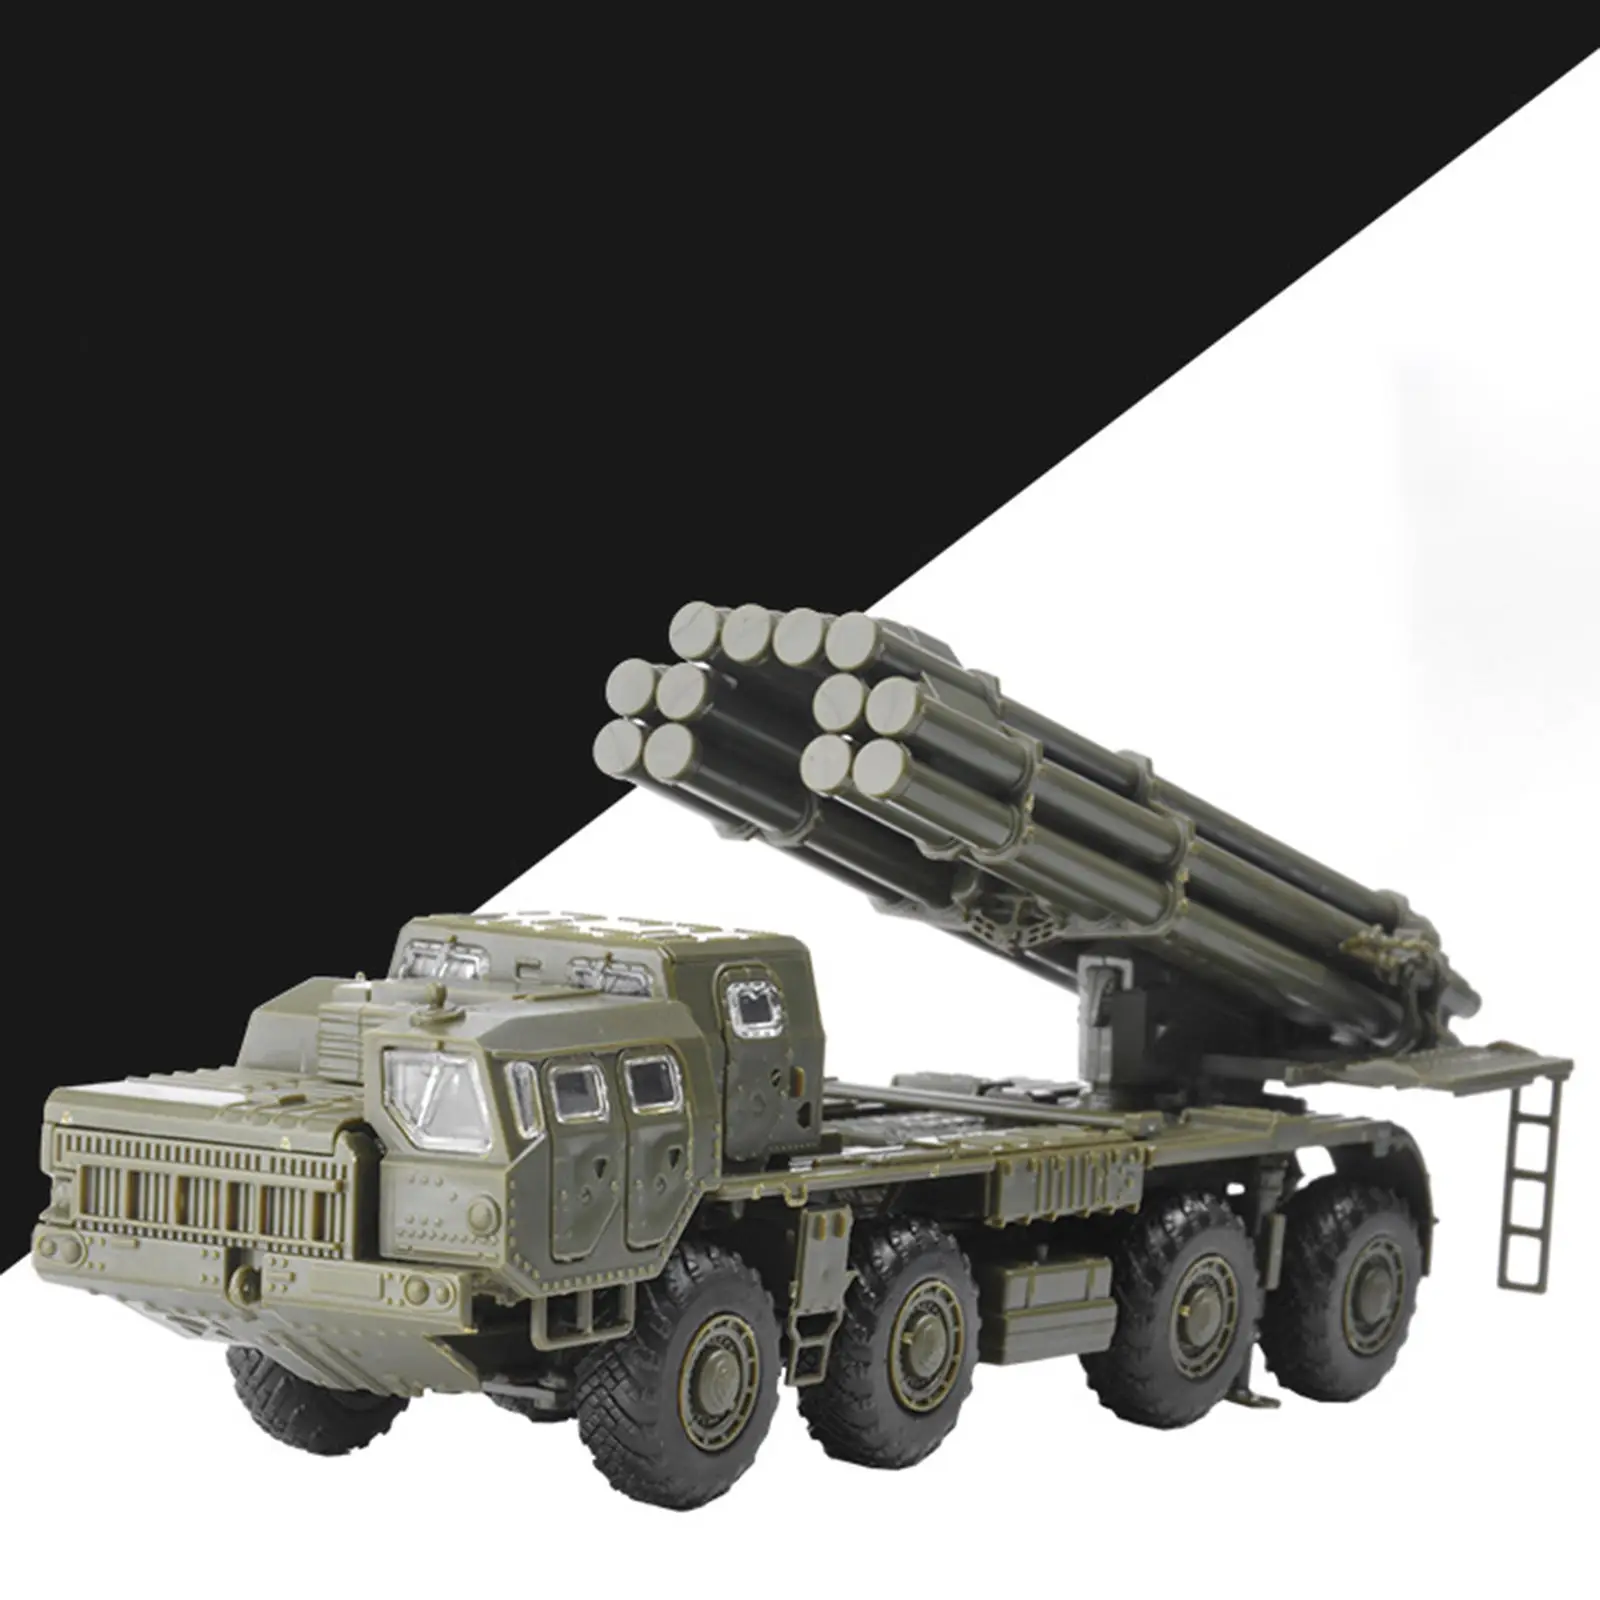 1:72 Russian Rocket Launcher Model Collection Display Vehicle Classic Puzzle Building Kit Assembled Truck Home Decor Ornament